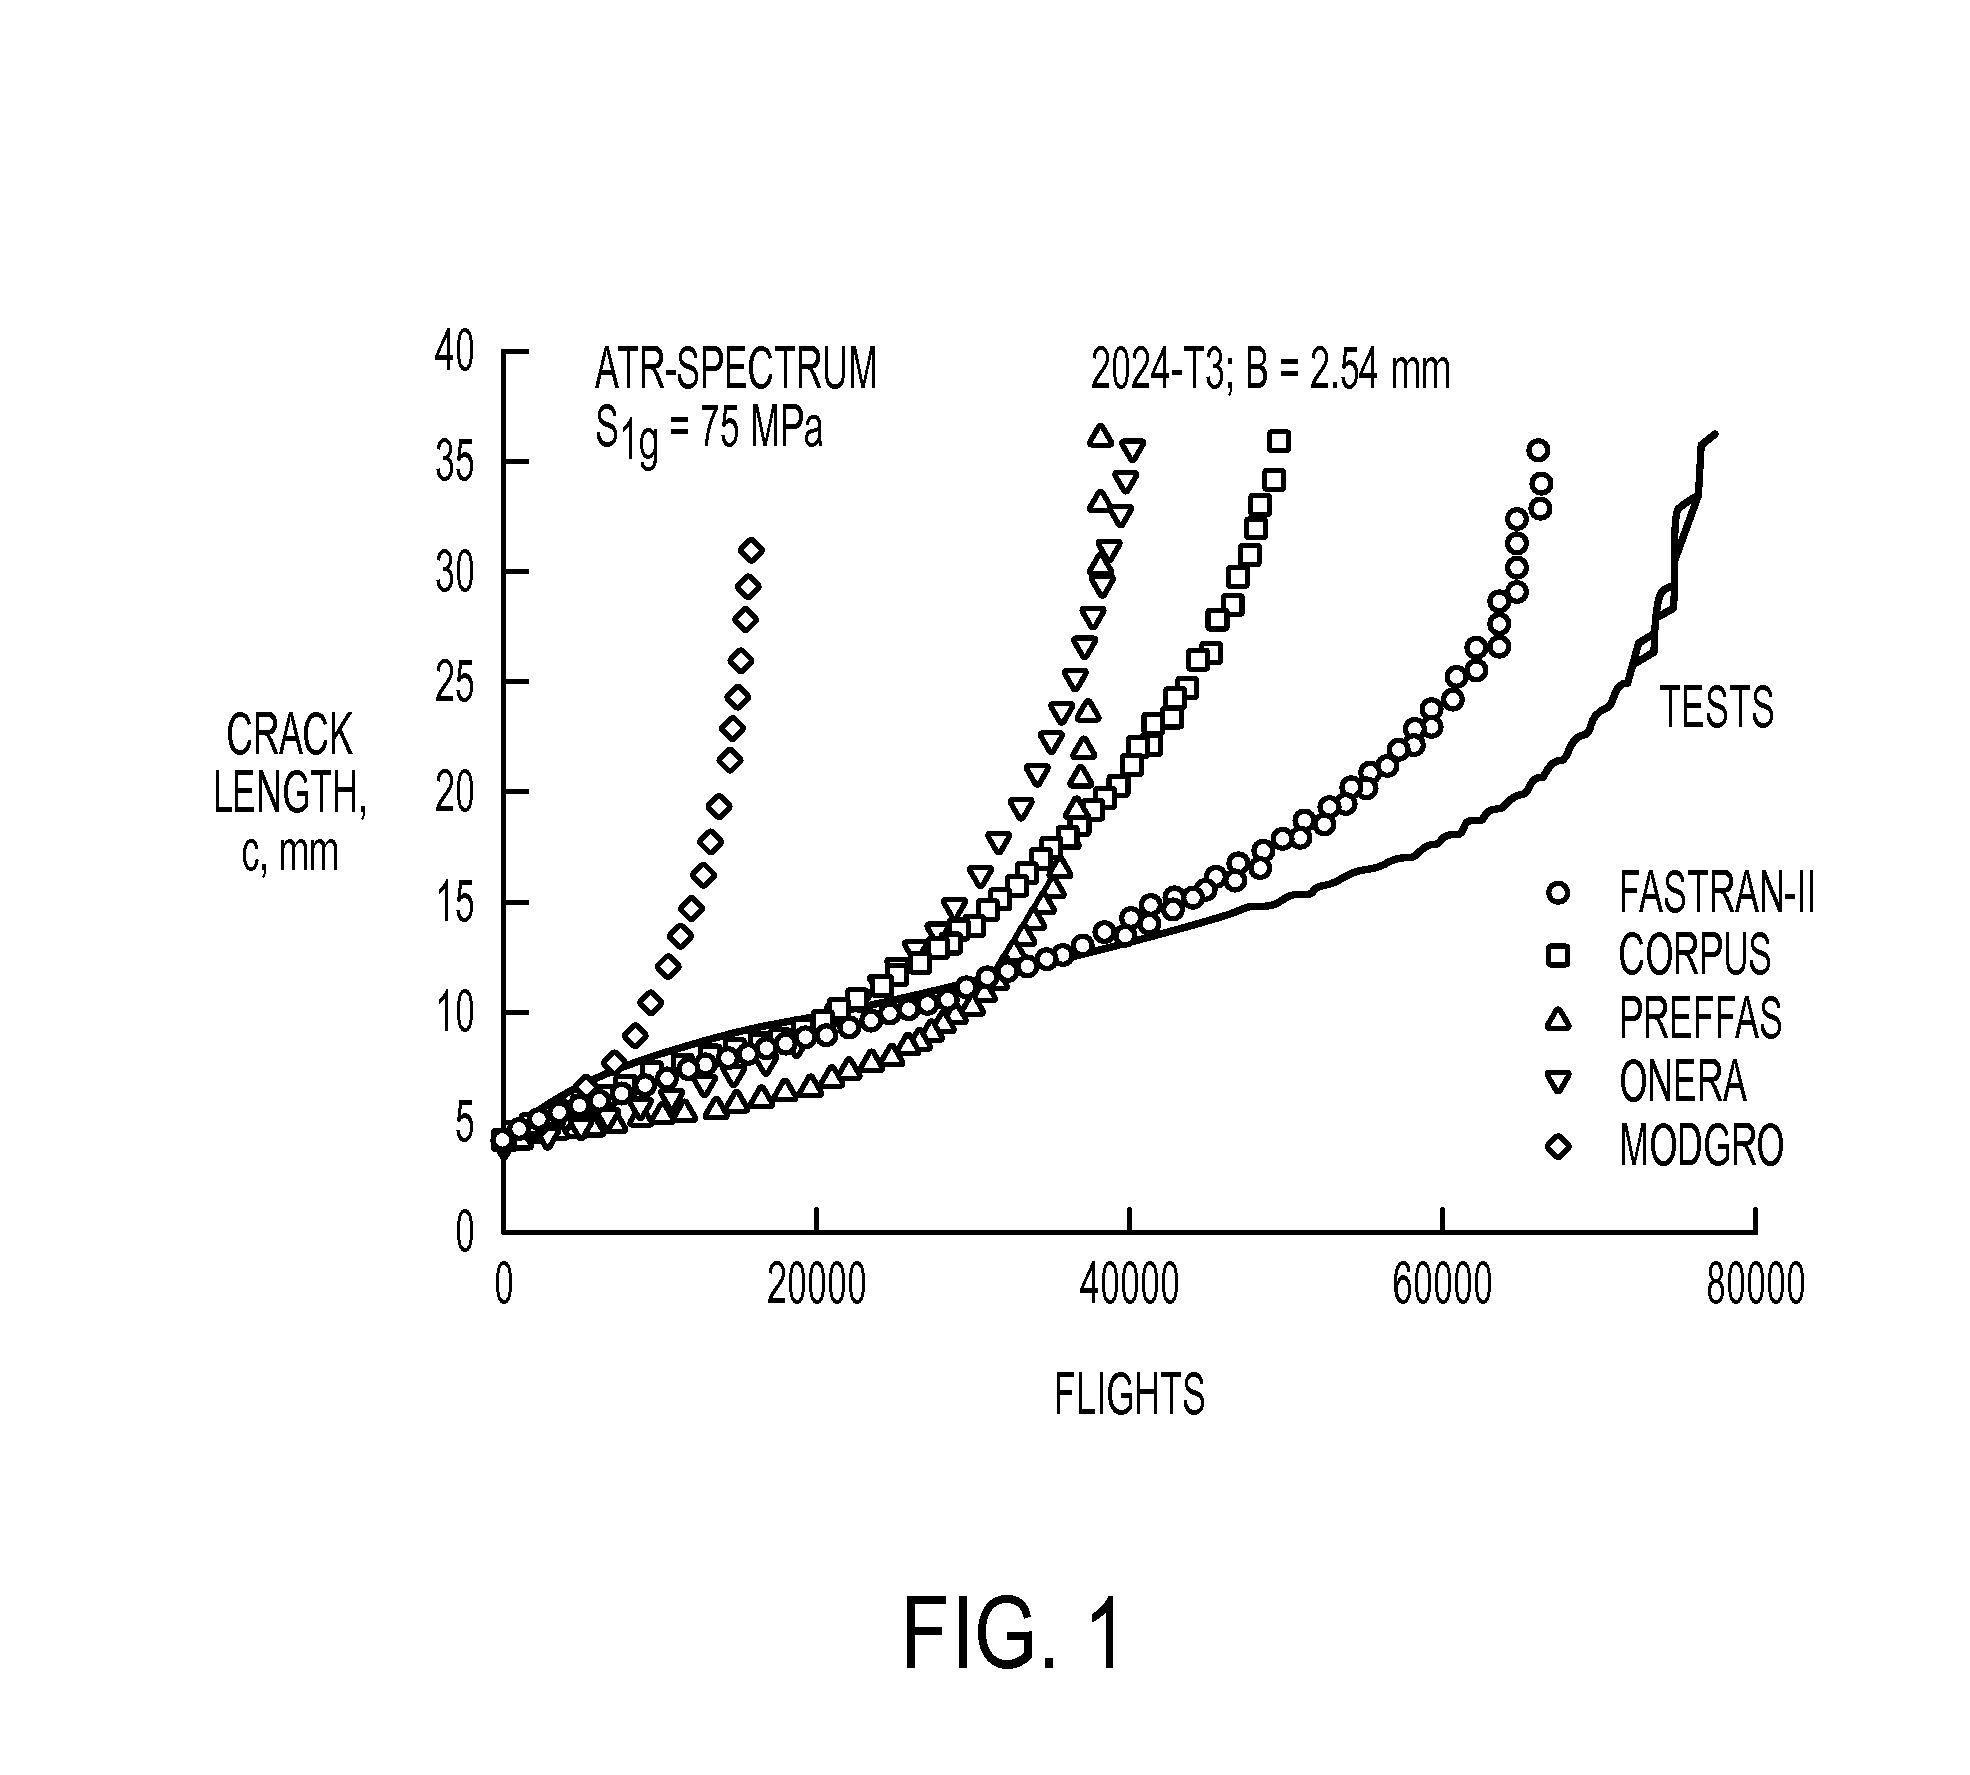 System and method for predicting material fatigue and damage